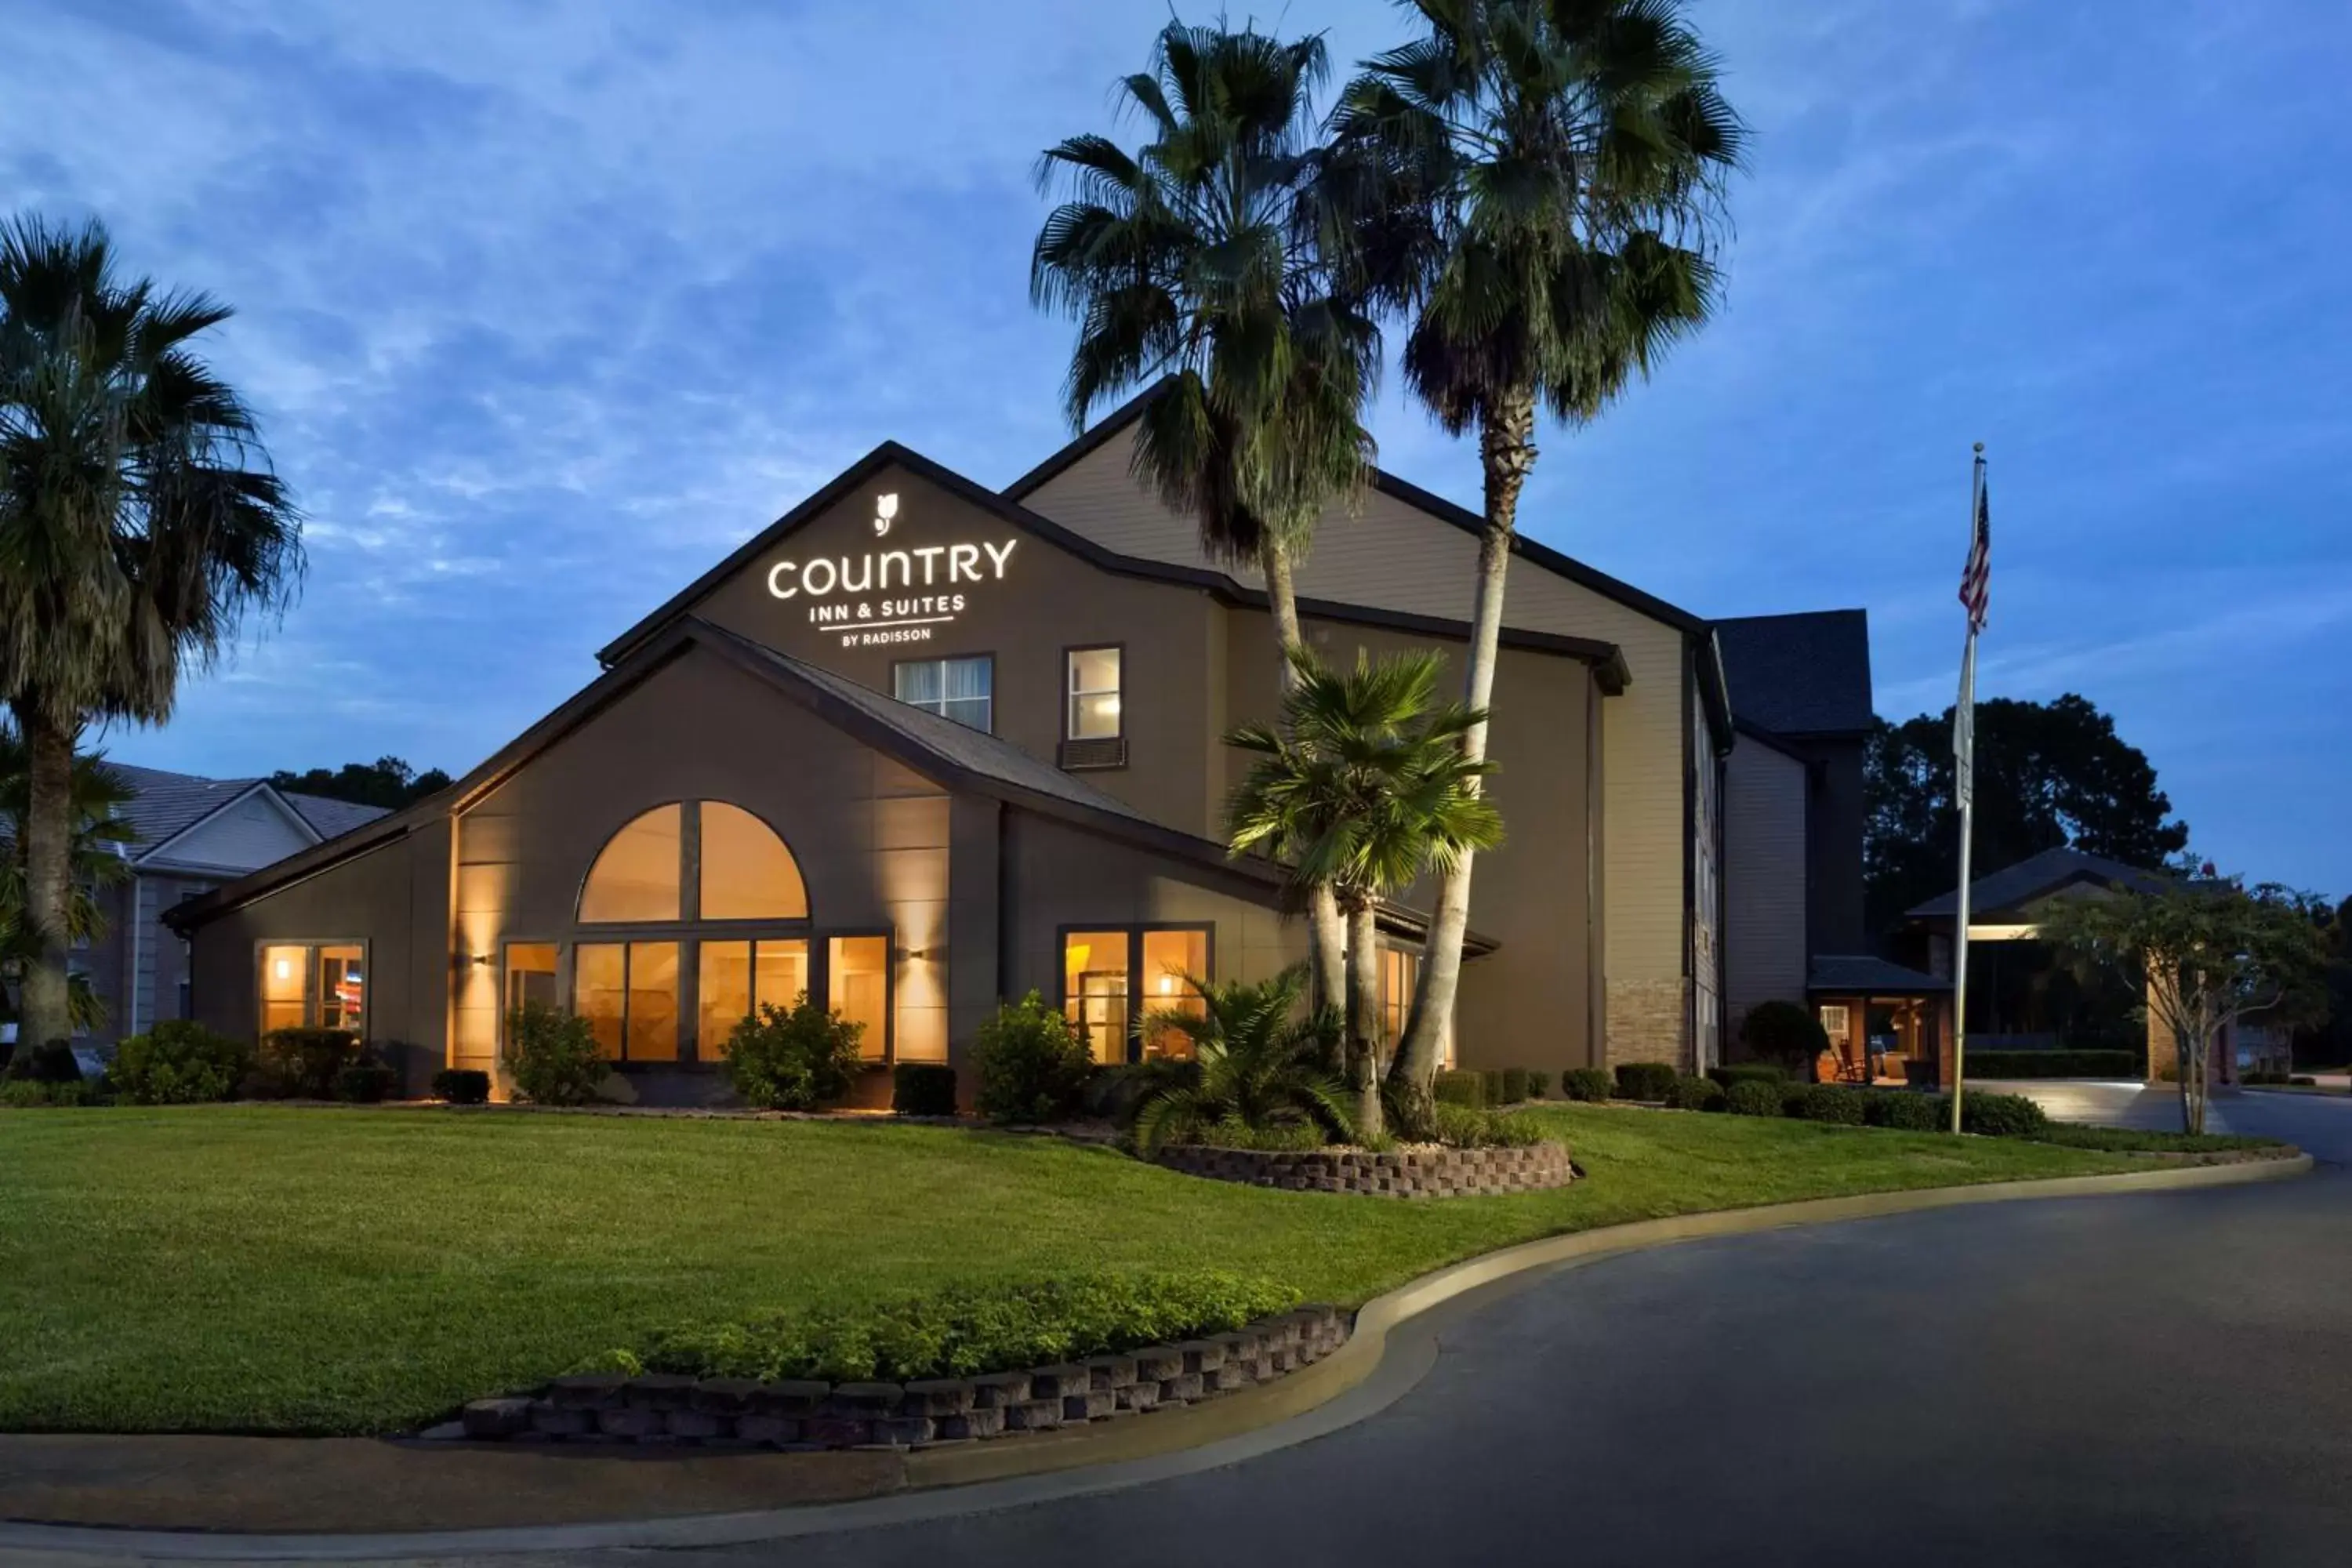 Property building in Country Inn & Suites by Radisson, Kingsland, GA